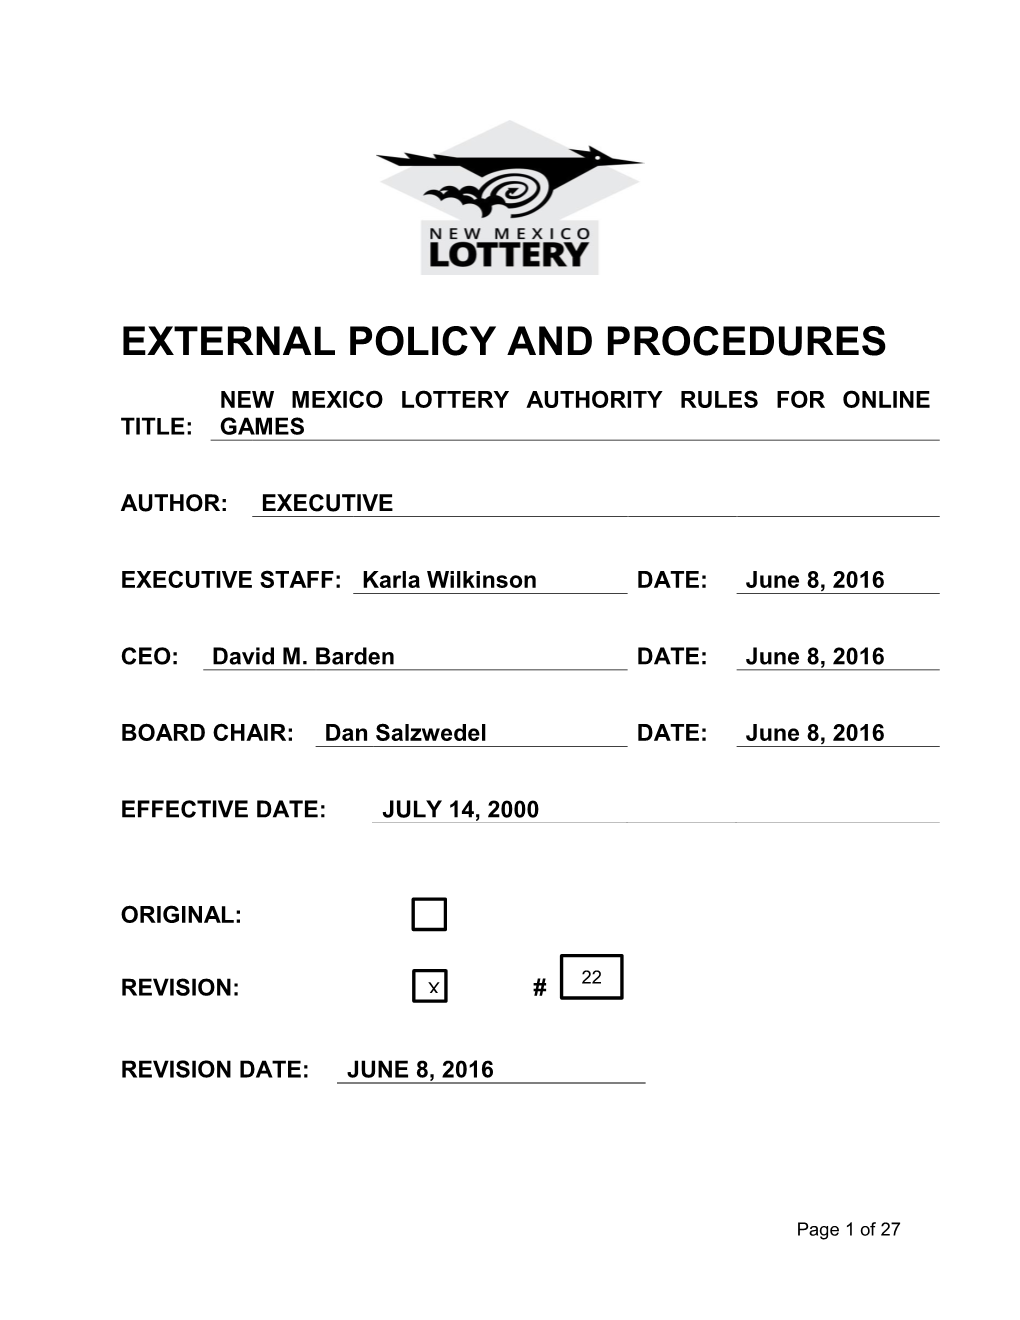 External Policy and Procedures